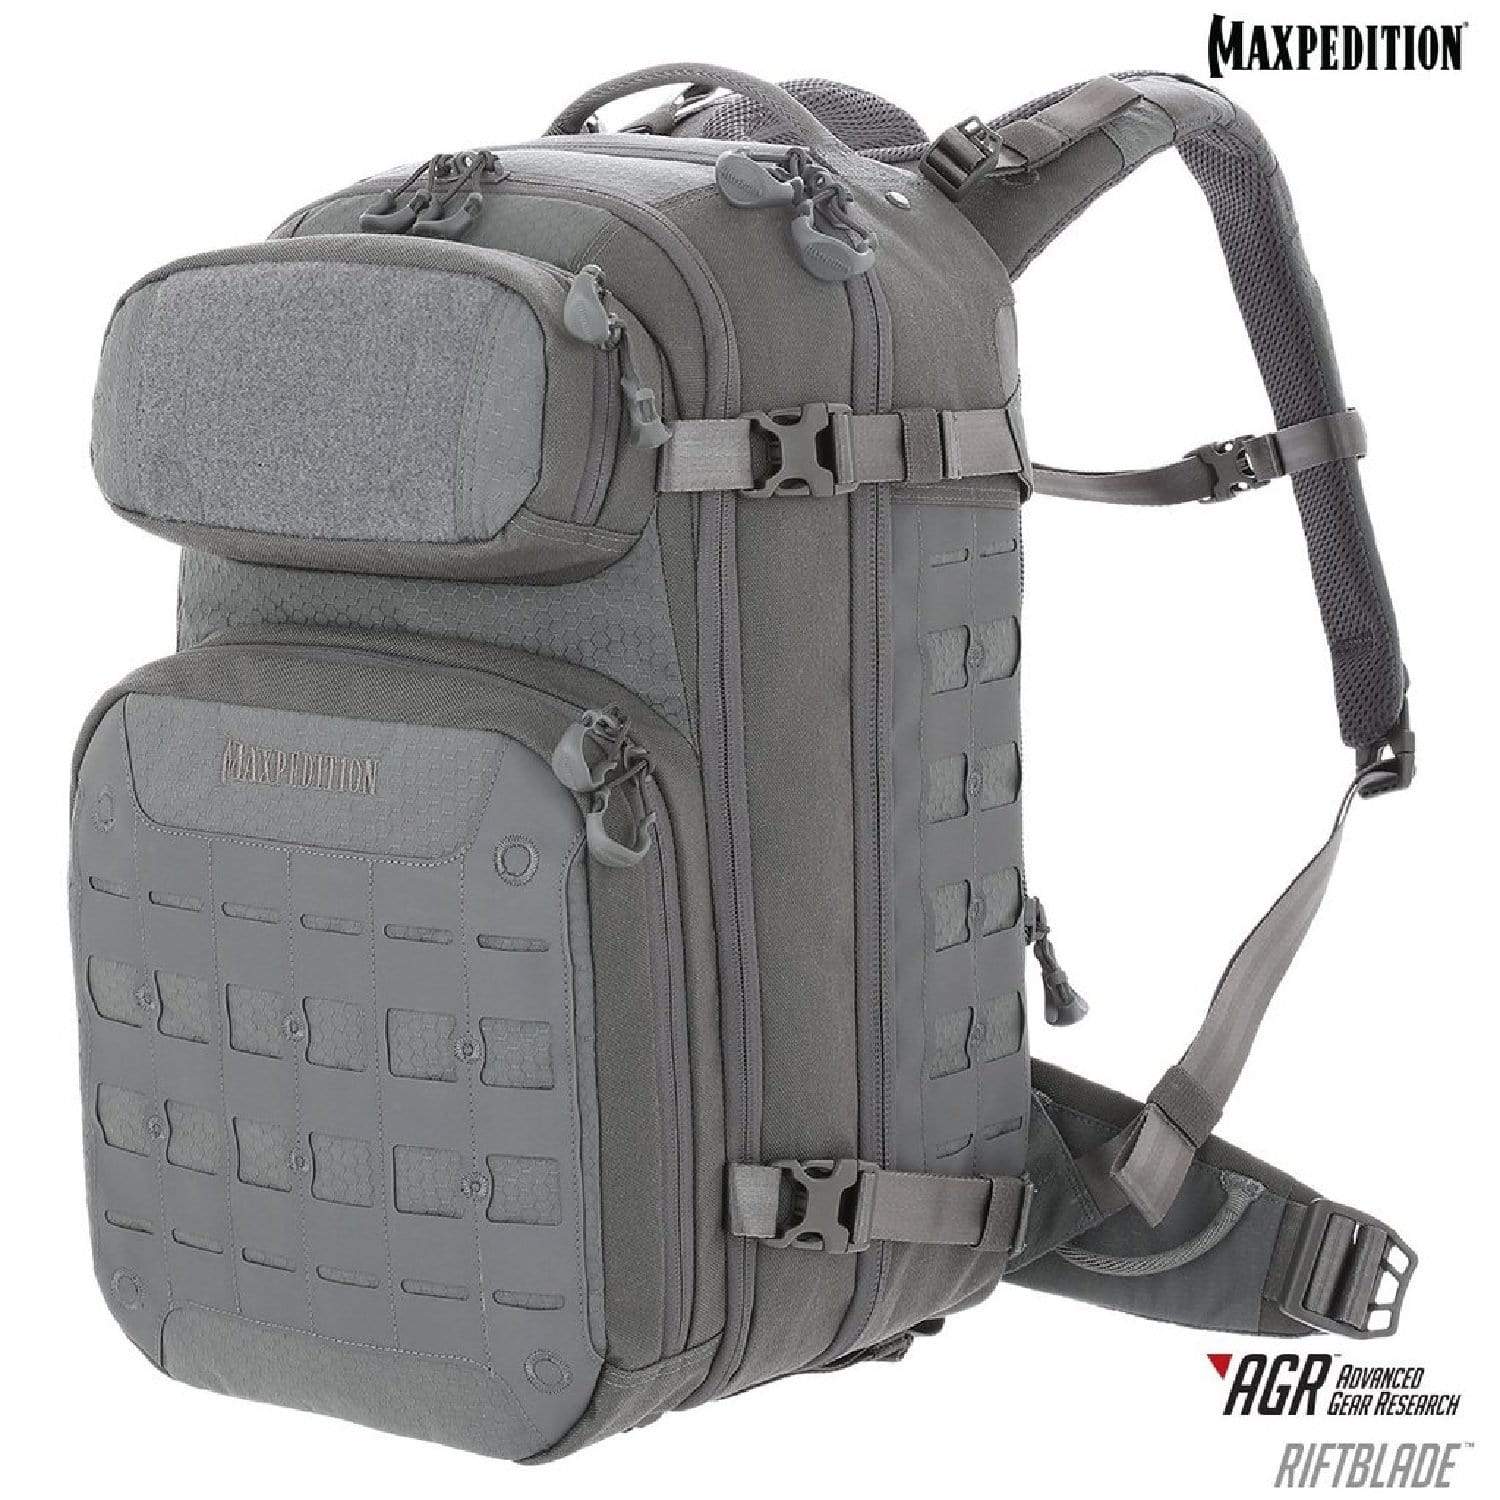 Maxpedition Camping & Outdoor : Backpacks & Gearbags Maxpedition RIFTBLADE CCW-Enabled Backpack Gray